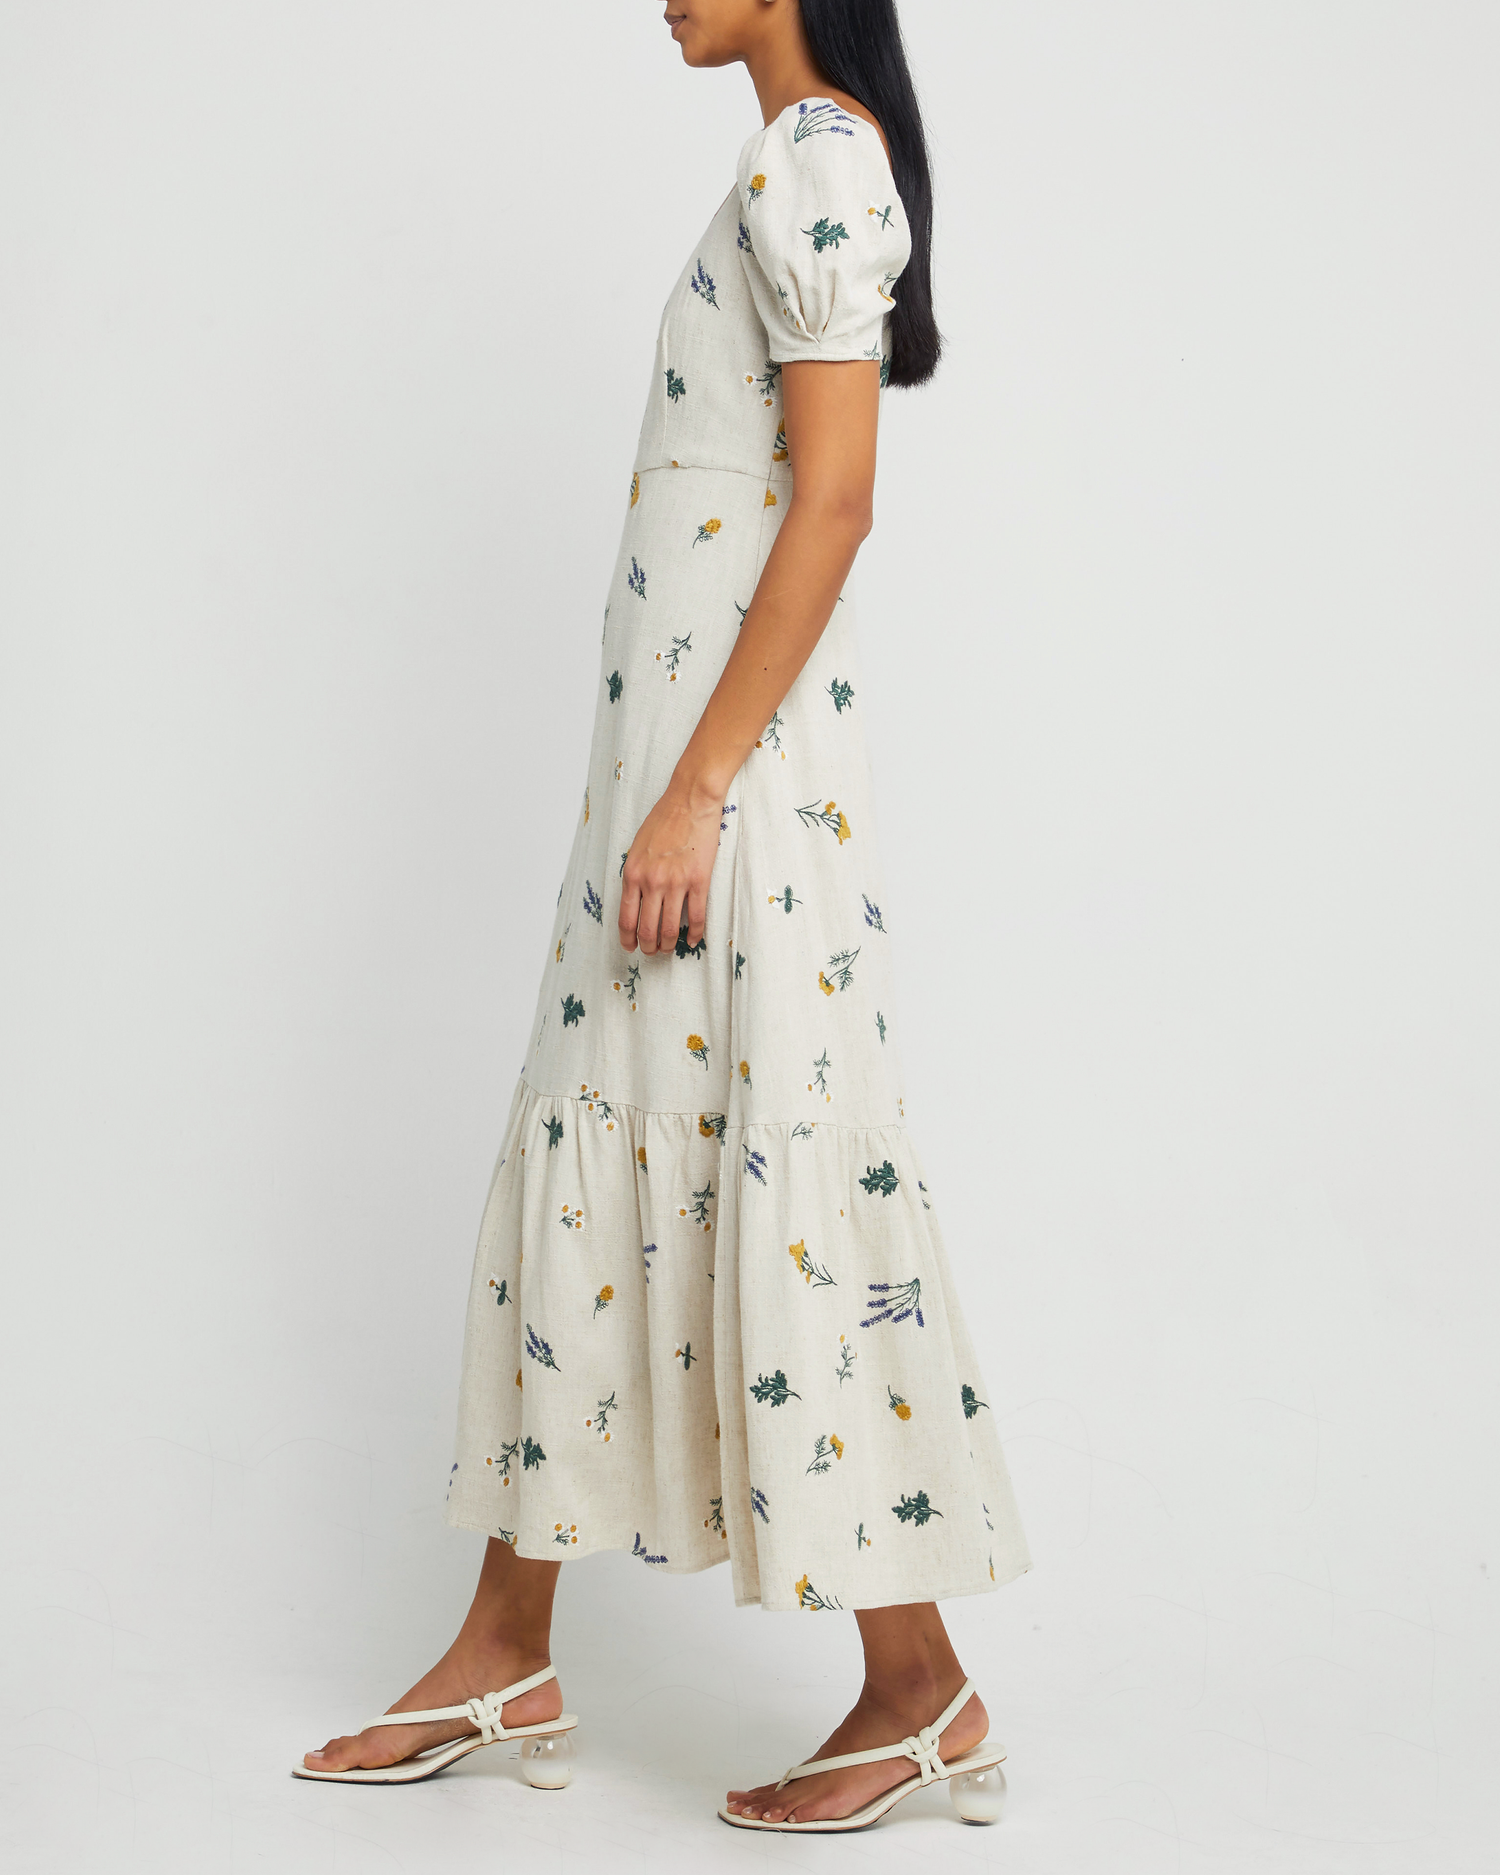 Third image of July Maxi Dress, a  maxi dress, linen, fall, floral, embroidered, puff sleeves, cap sleeves